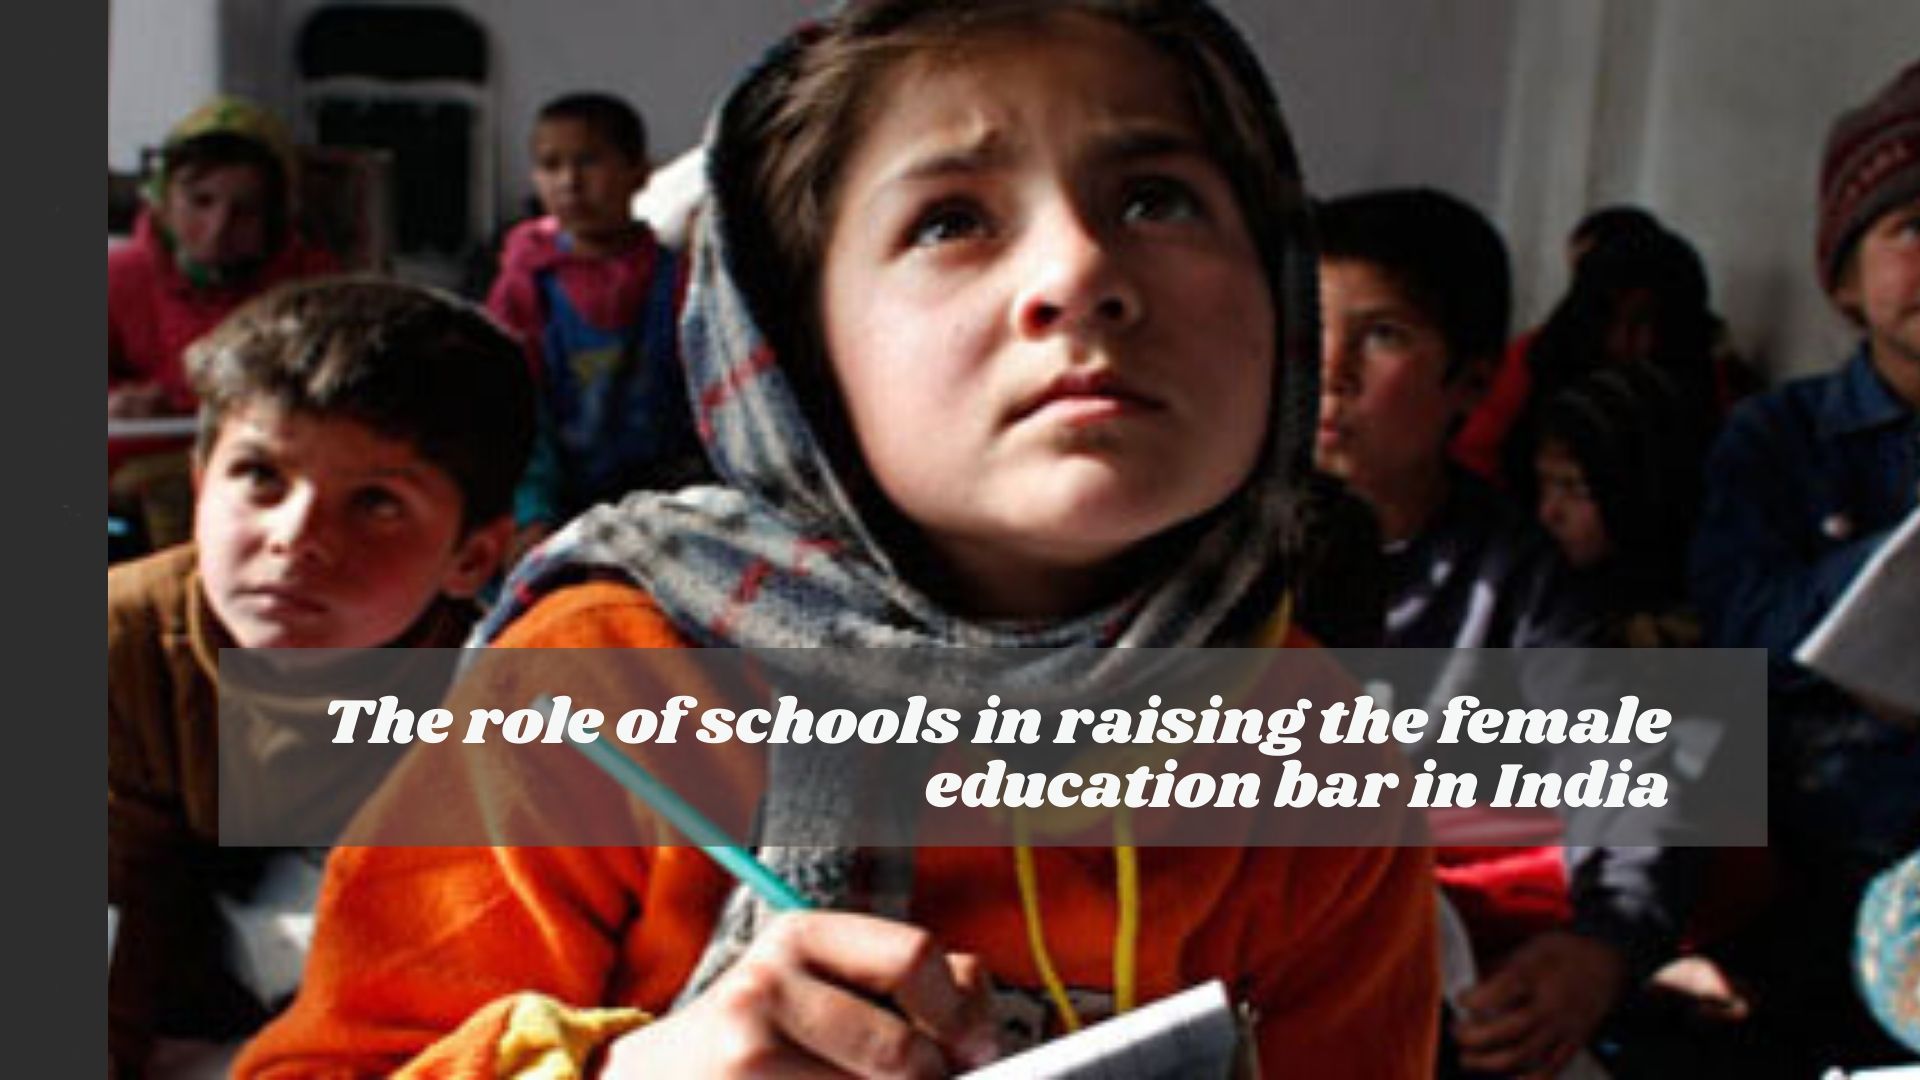 The role of schools in raising the female education bar in India